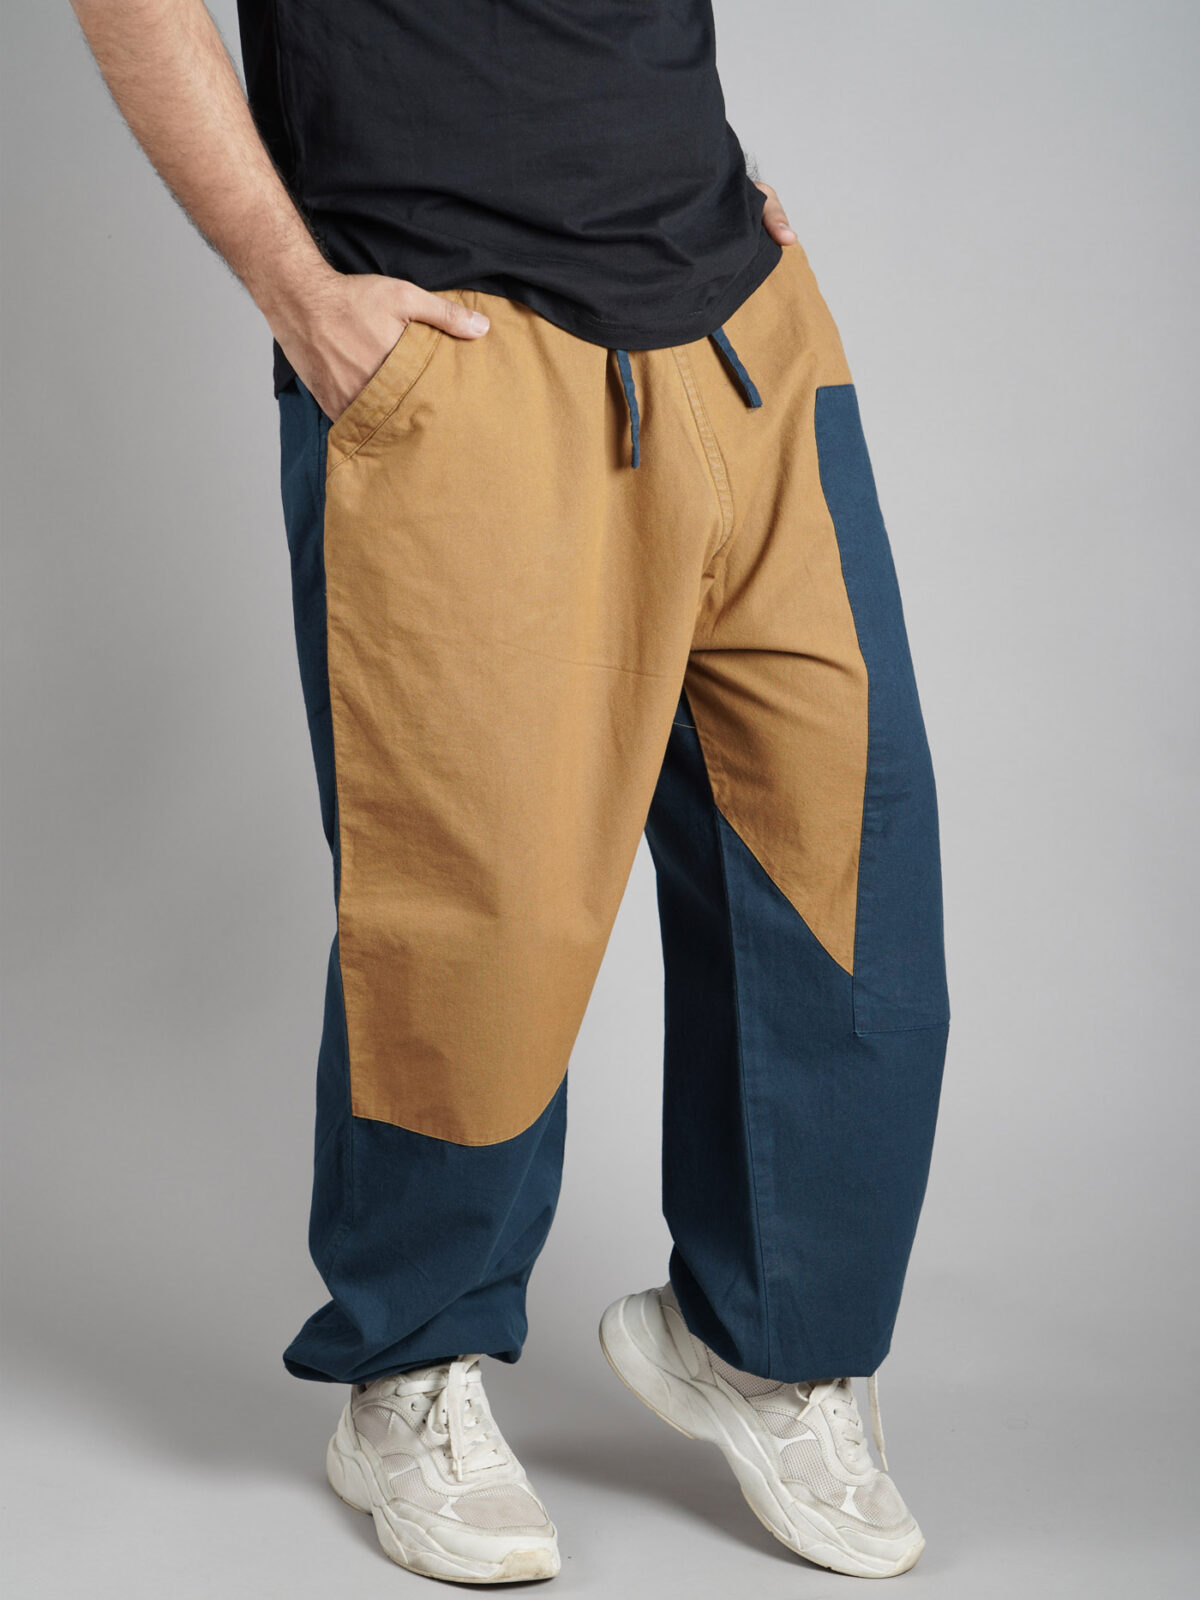 Duo Navy Tan Earthy Hoppers – Unisex Pants For Men And Women - Bombay ...